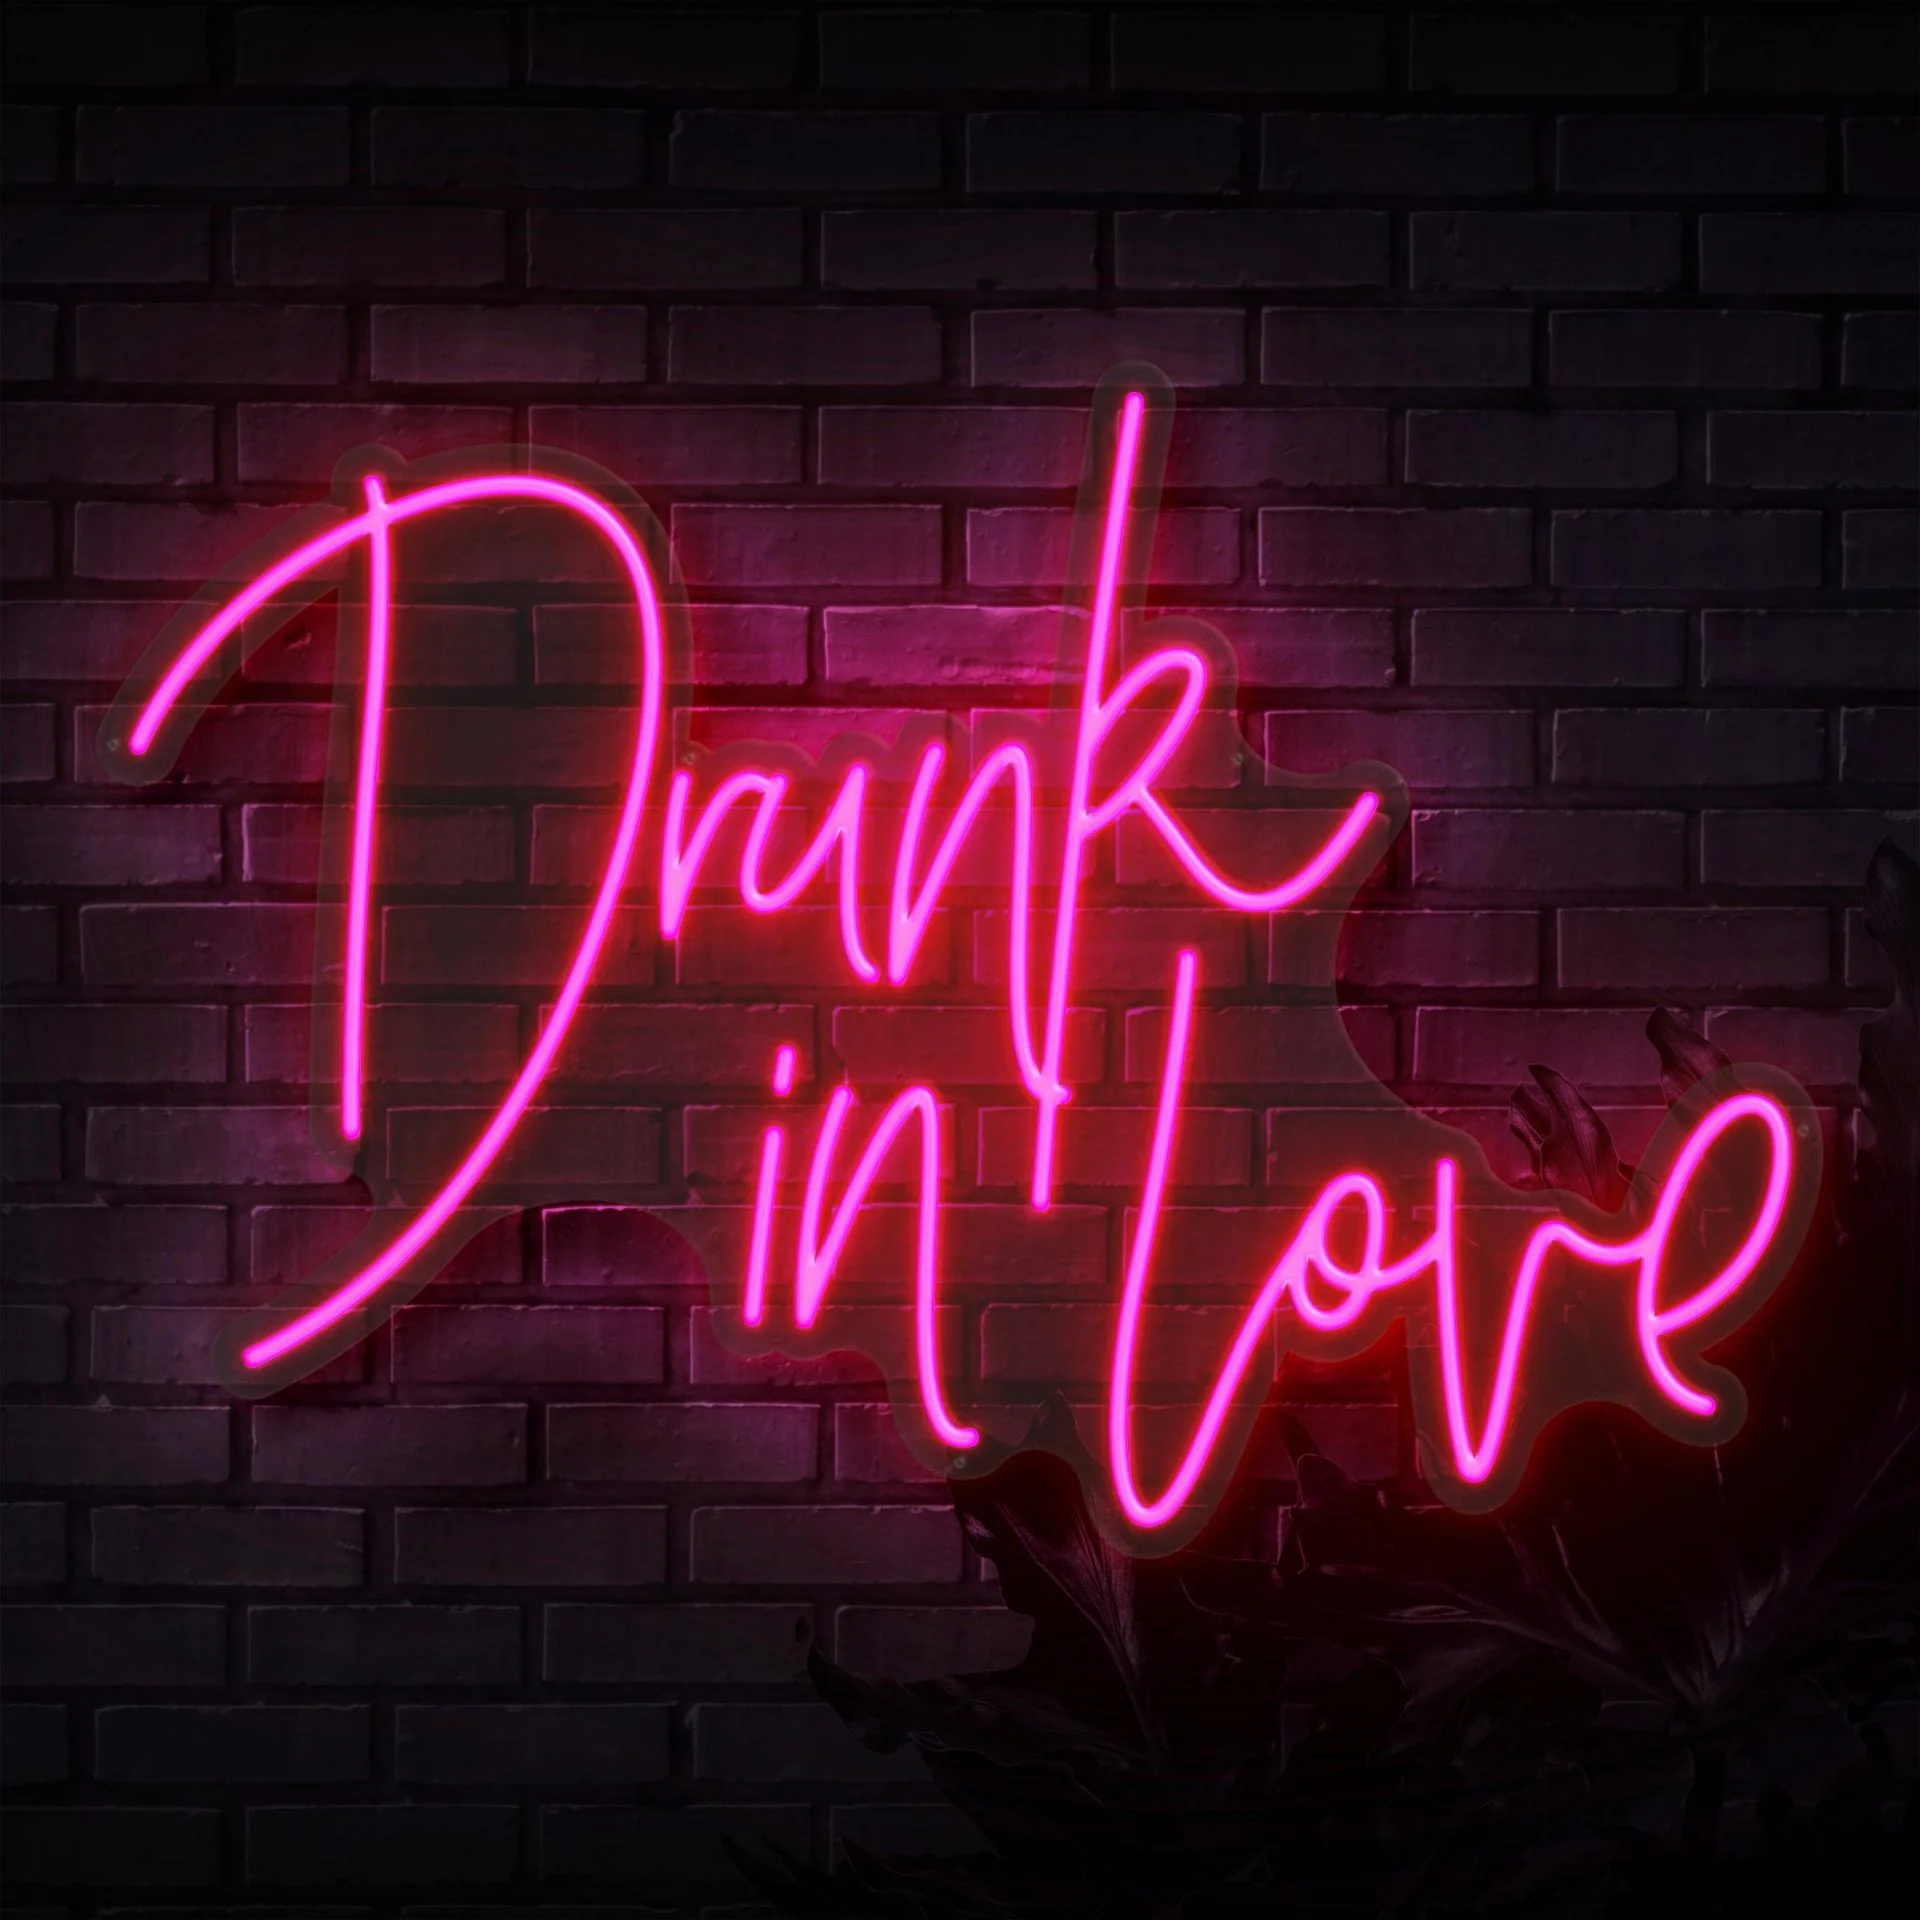 Drunk In Love Neon Sign Hire Perth <a href='#' class='view-taggged-products' data-id=7329>Click to View Products</a><div class='taggged-products-slider-wrap'><div class='heading-tag-products'></div><div class='taggged-products-slider'></div></div><div class='loading-spinner'><i class='fa fa-spinner fa-spin'></i></div>